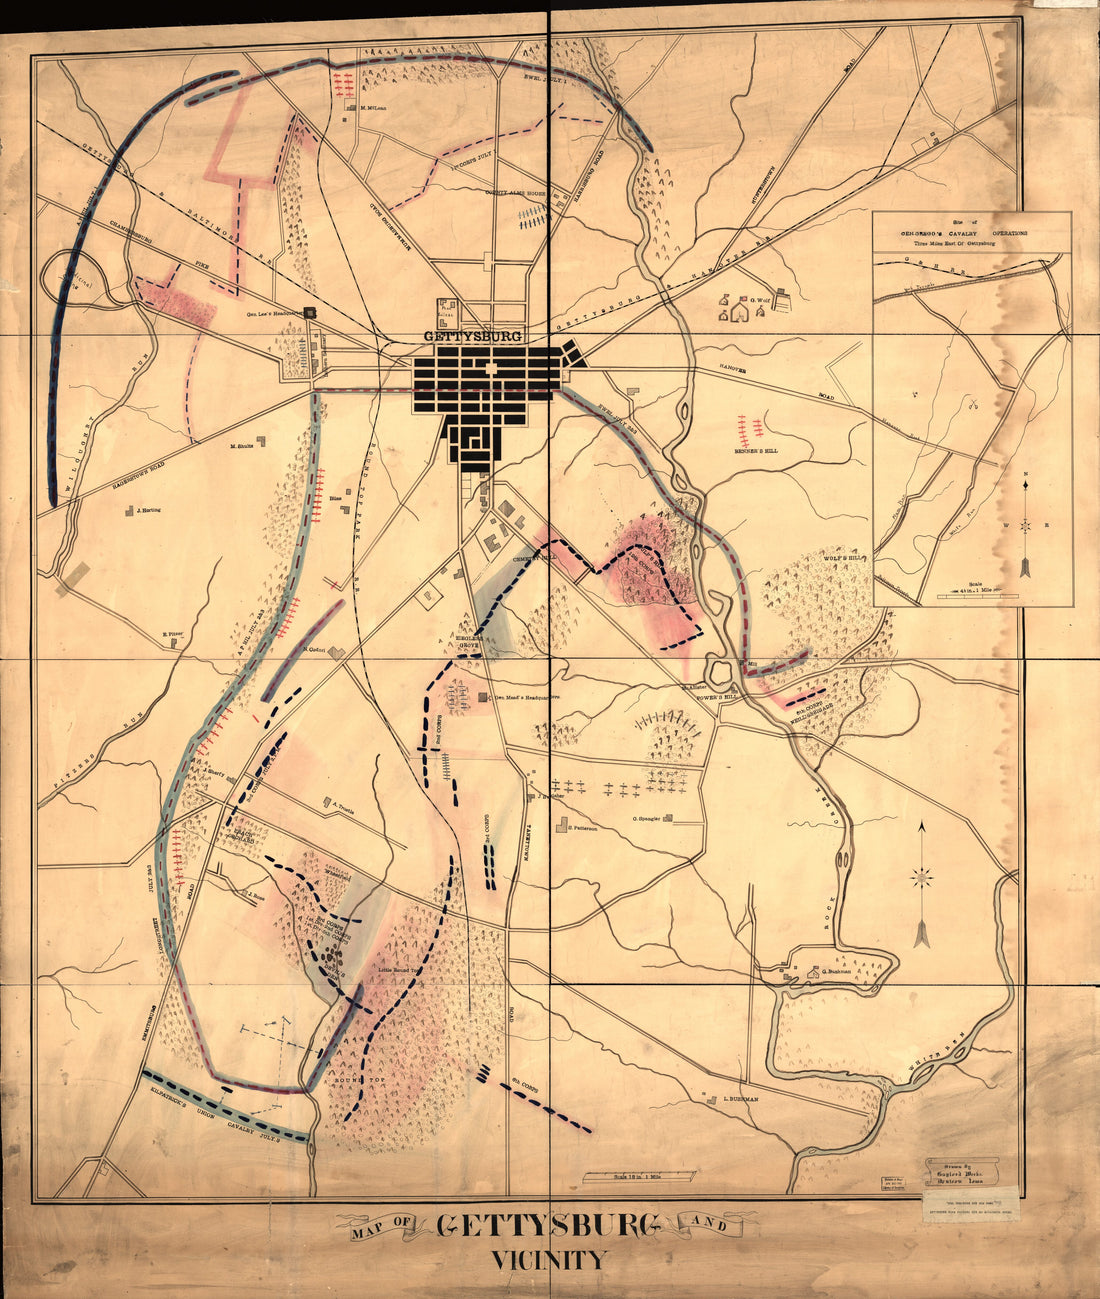 This old map of Map of Gettysburg and Vicinity from 1863 was created by Gaylord Weeks in 1863